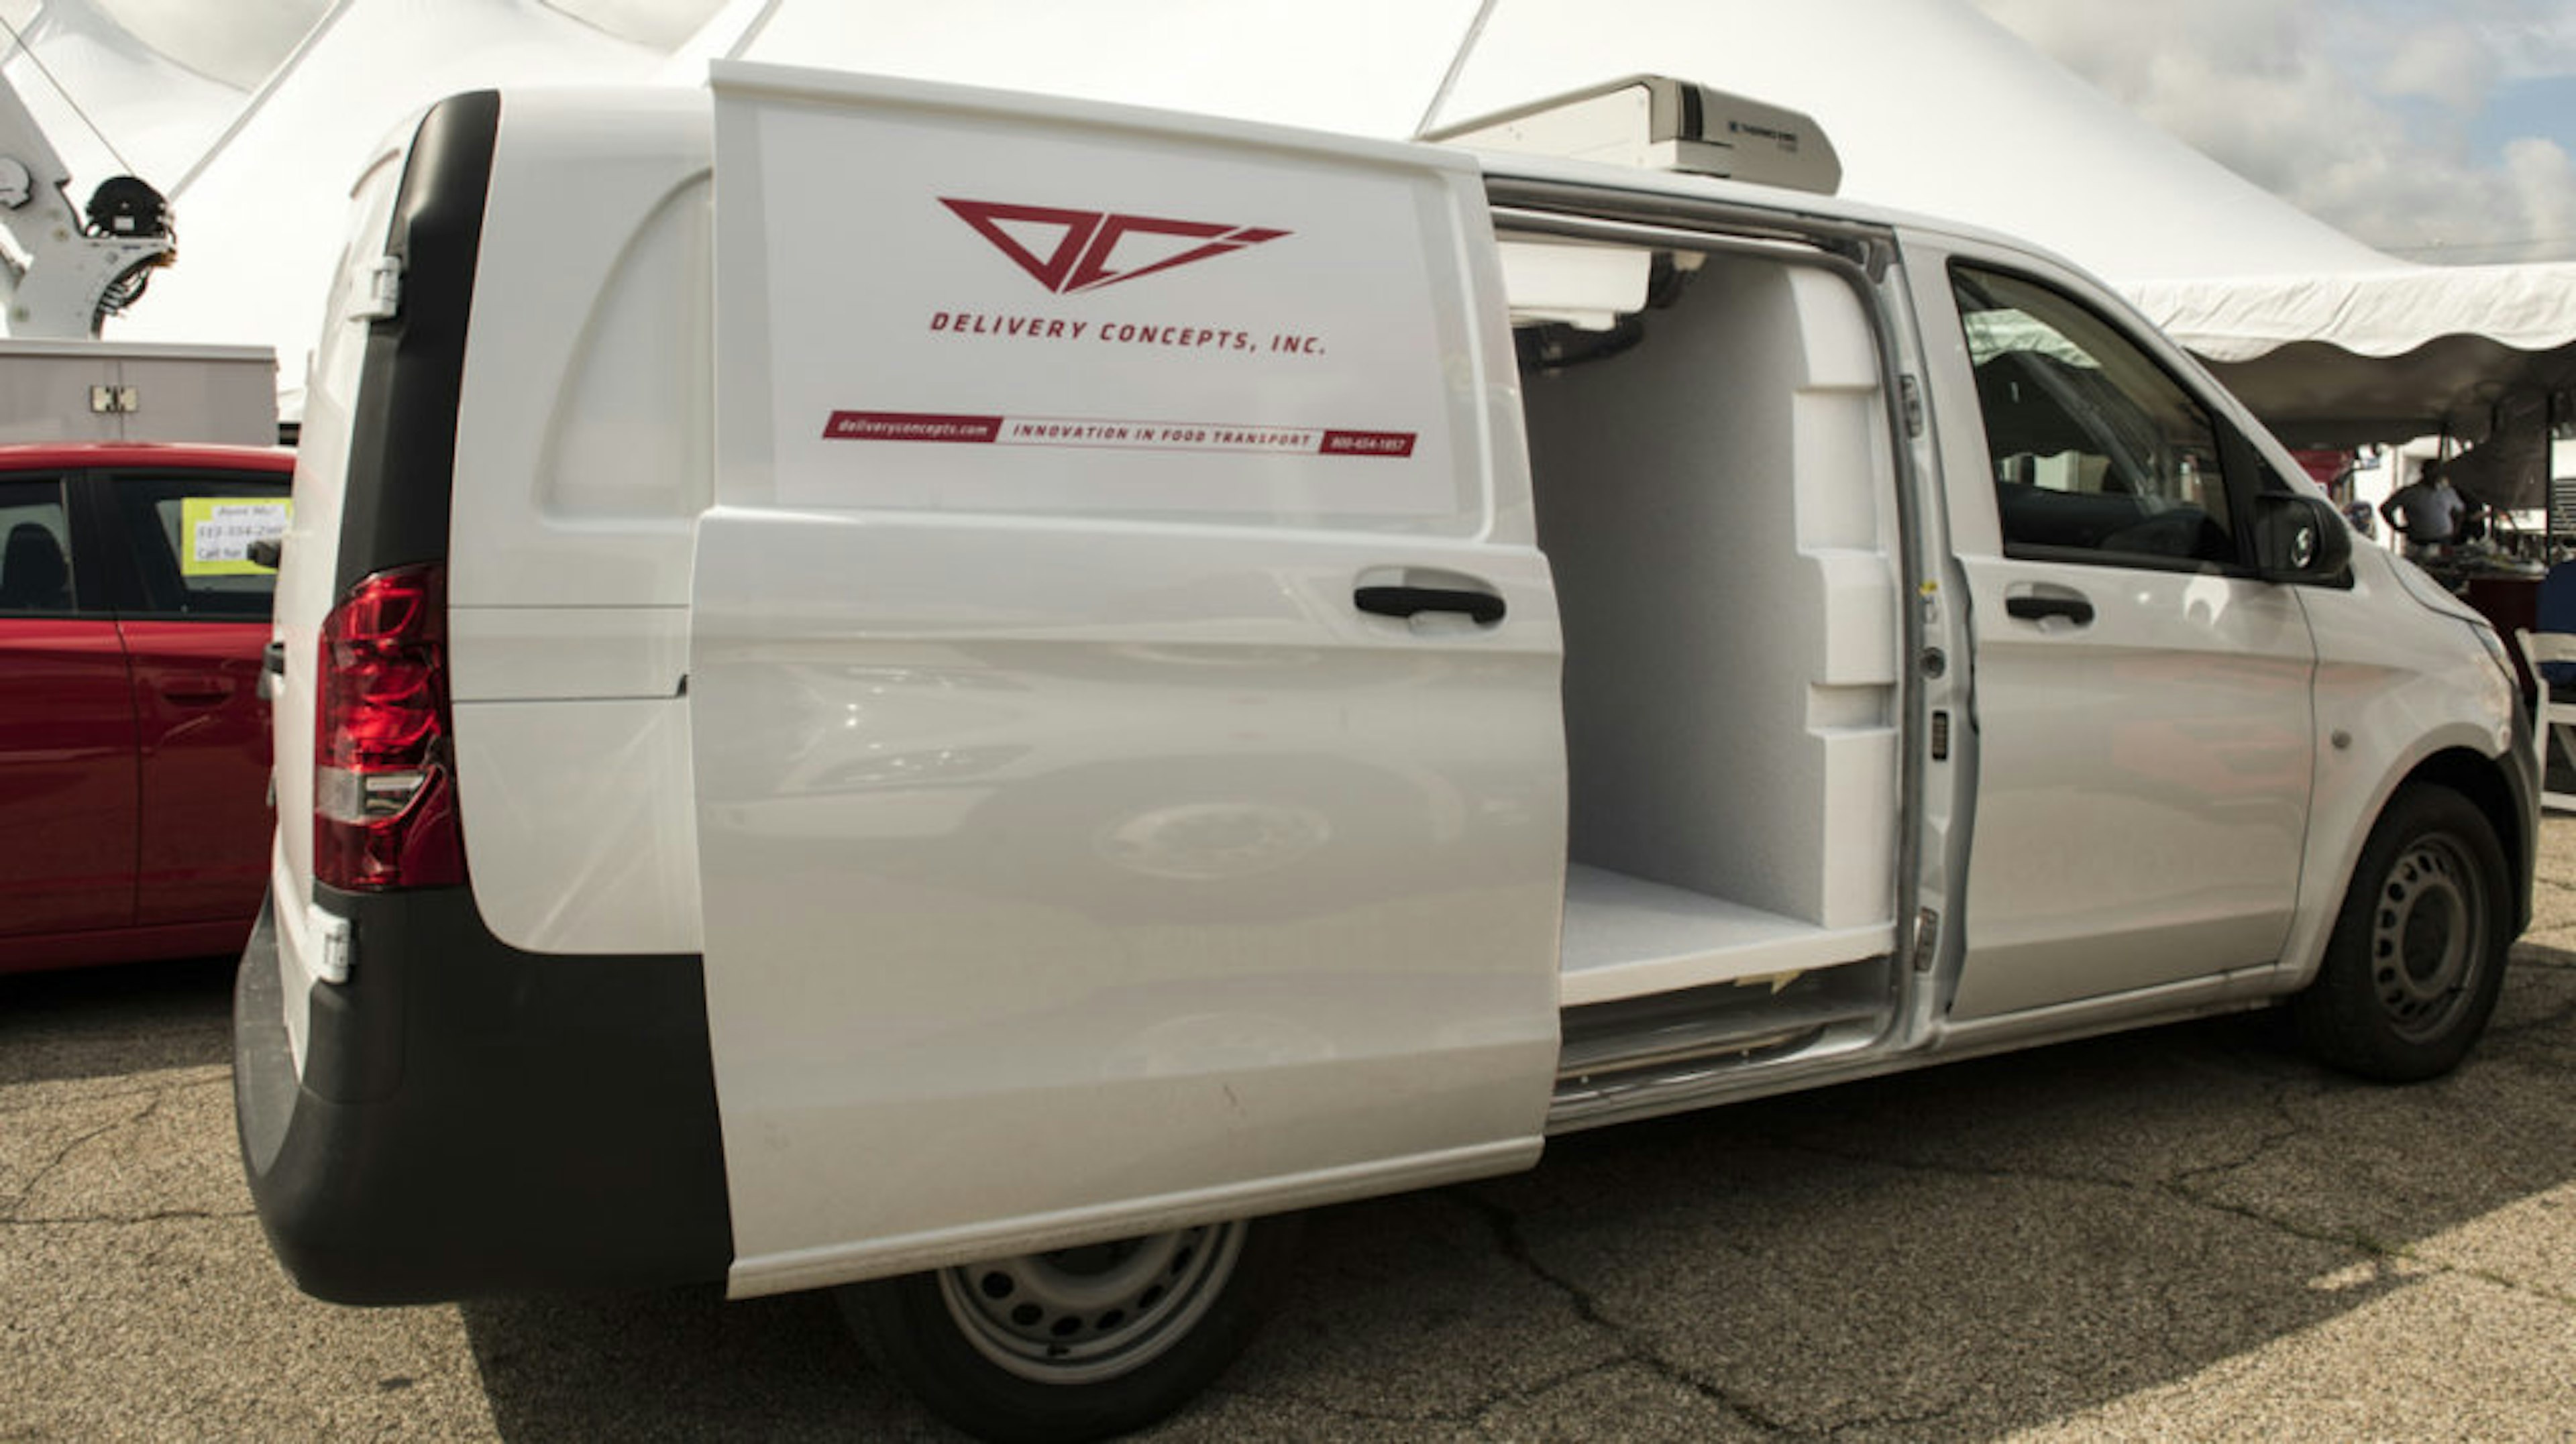 Refrigerated compact van - side